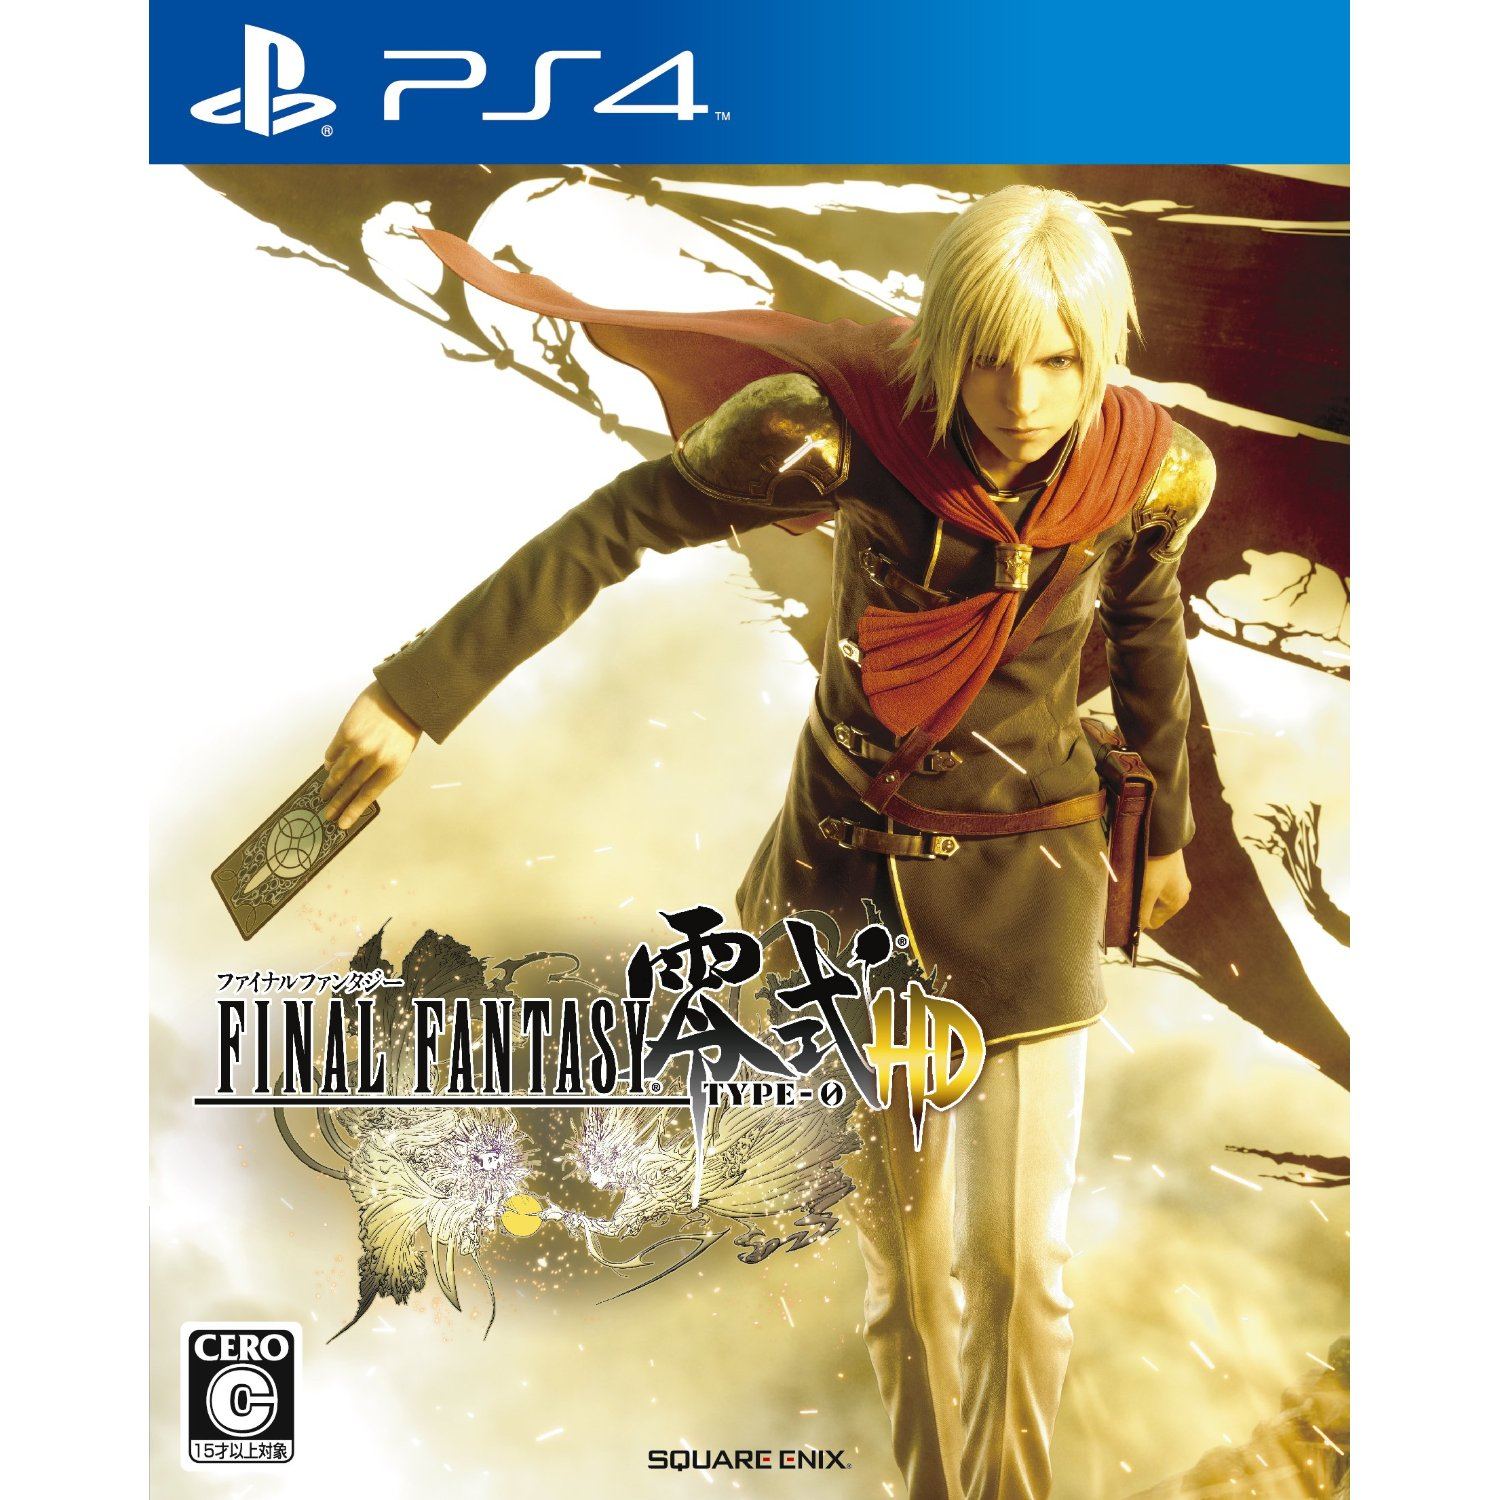 Final Fantasy Type-0 HD for PlayStation 4